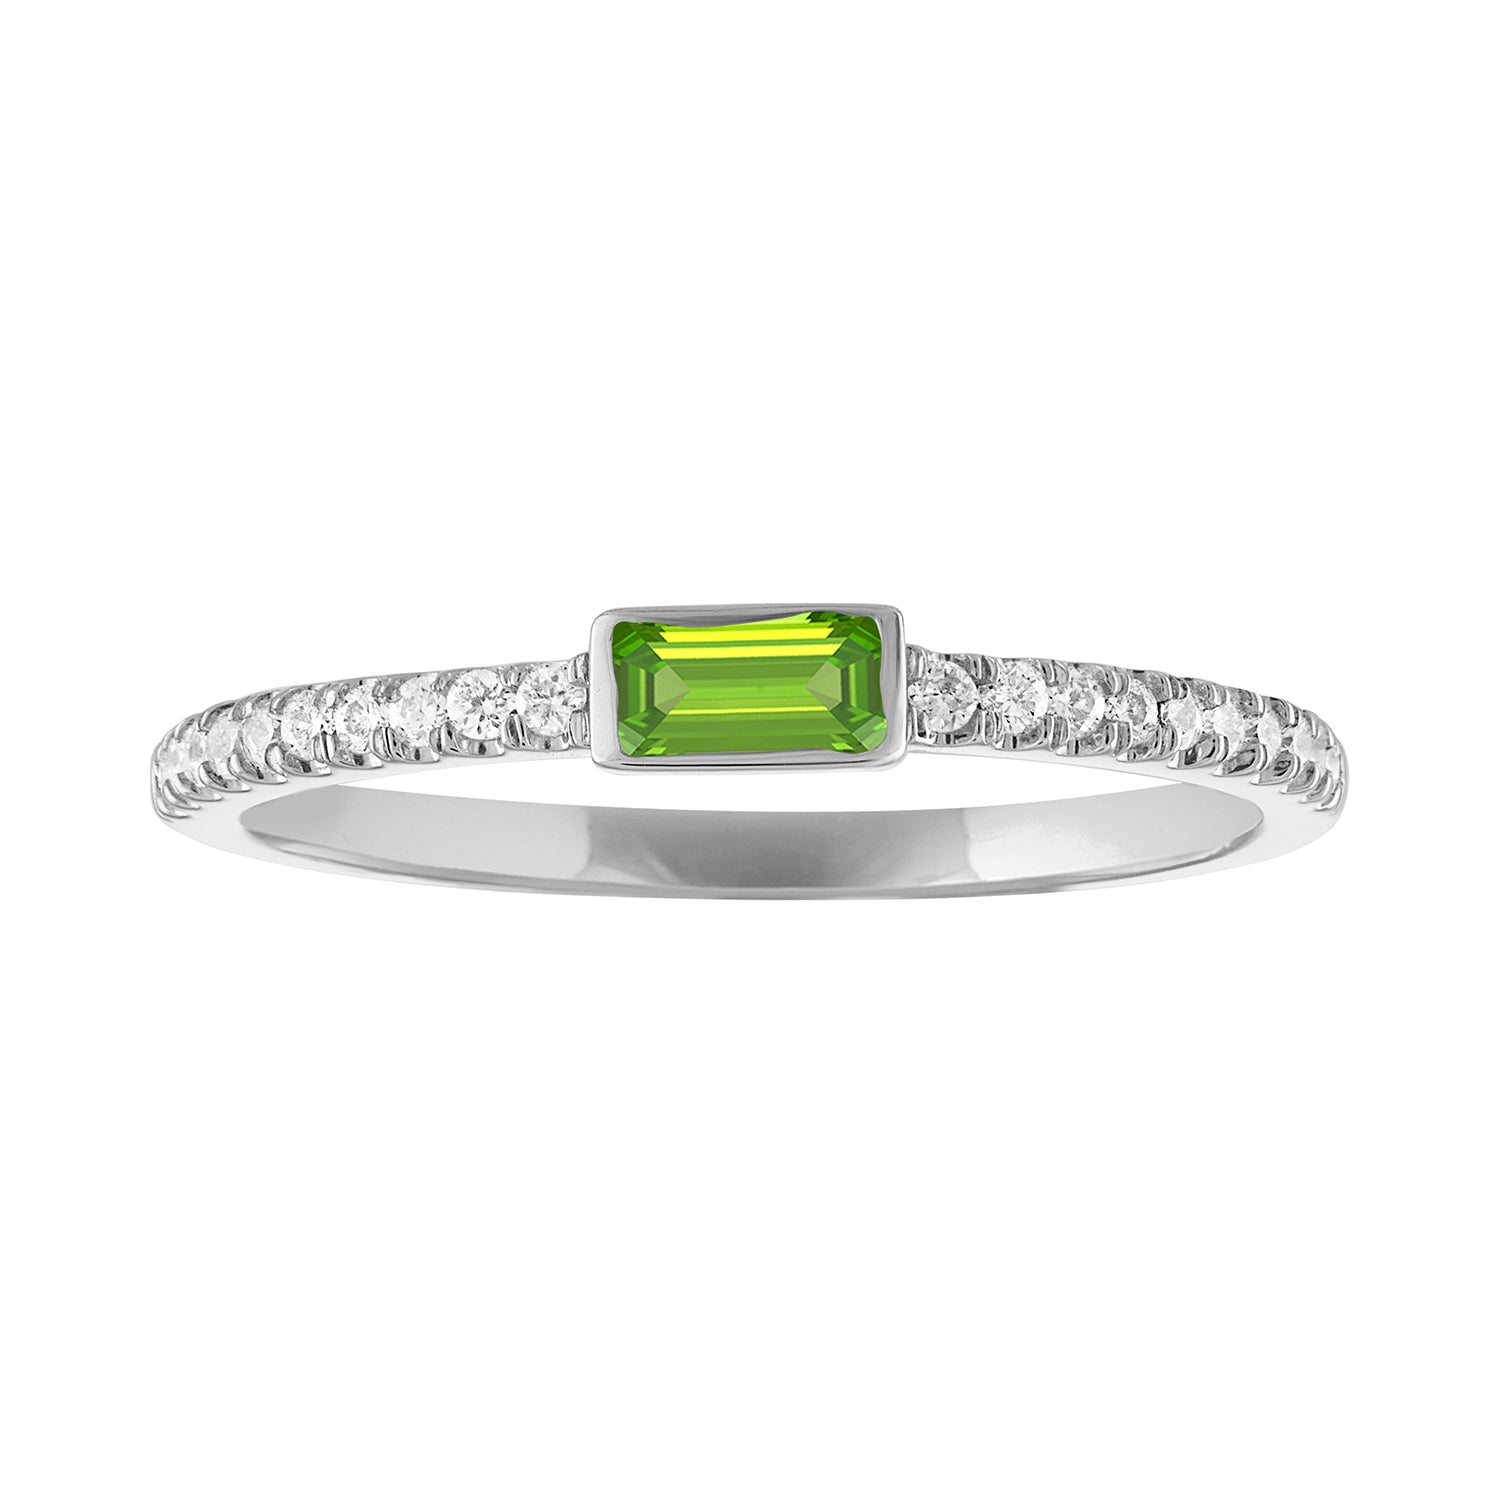 White gold skinny band with a bezeled peridot baguette in the center and round diamonds on the shank. 